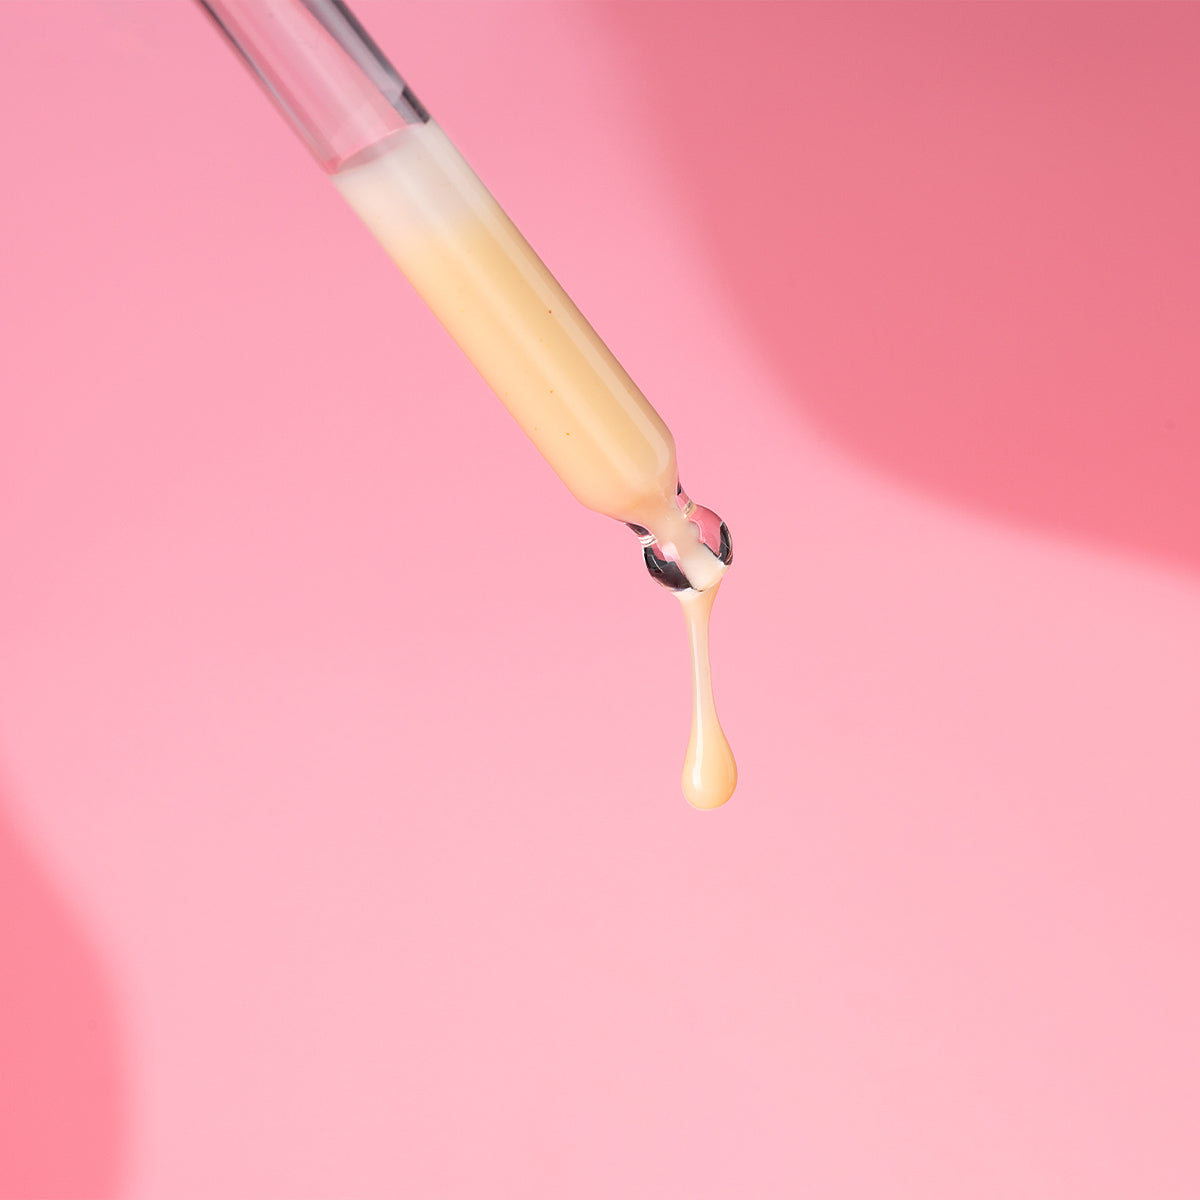 A person is pouring the Alteya Organics Bio Damascena Rose Otto Regenerating Concentrate into a tube on a pink background.